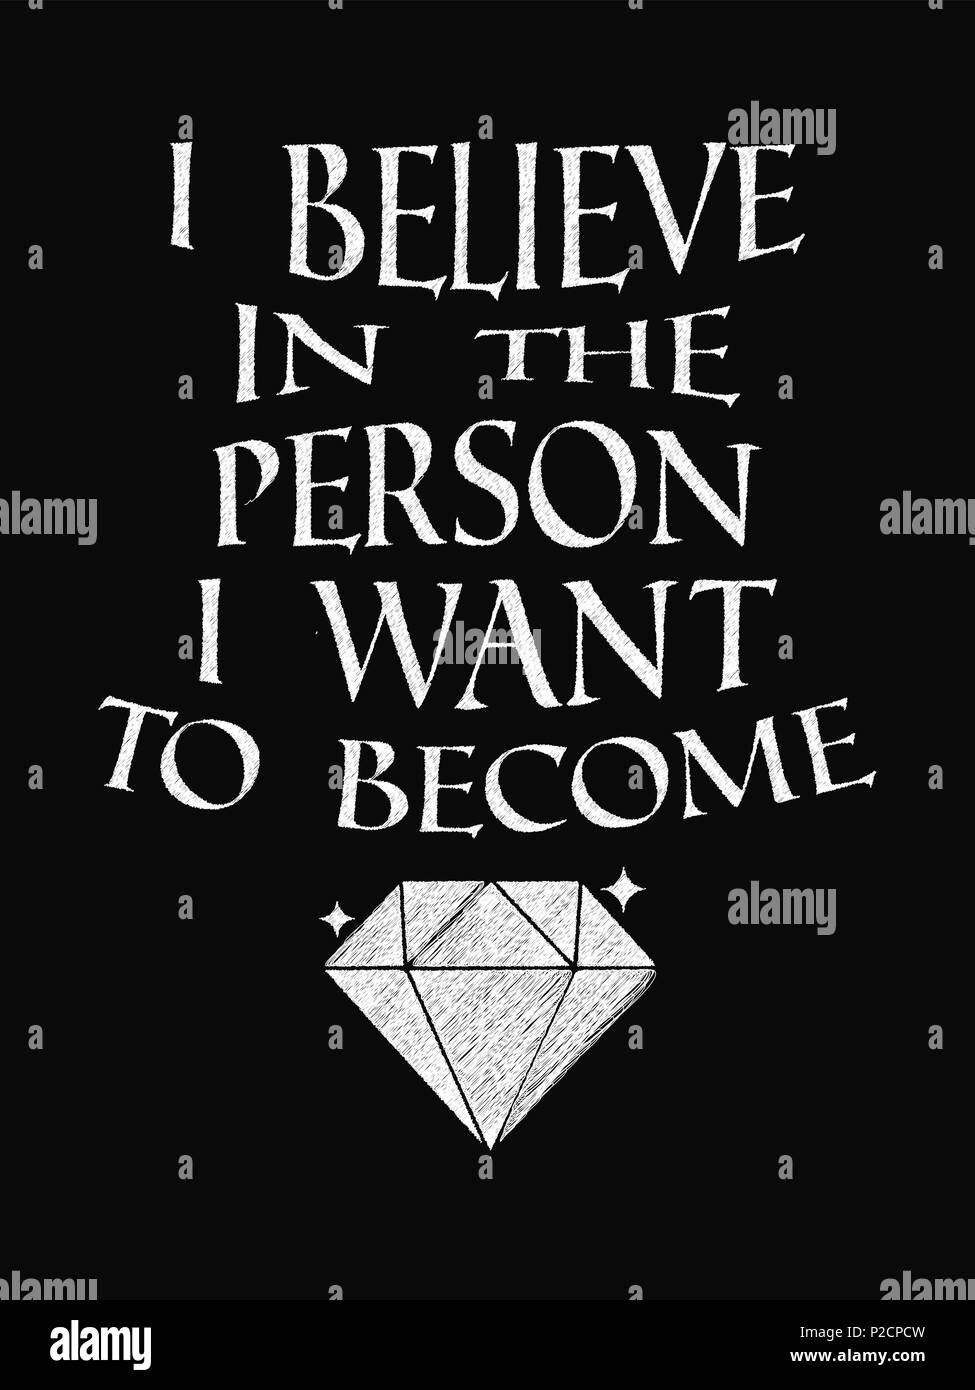 Motivational Quote Poster. I Believe in the Person I Want to Become. Chalk Calligraphy Style. Design Lettering. Stock Vector